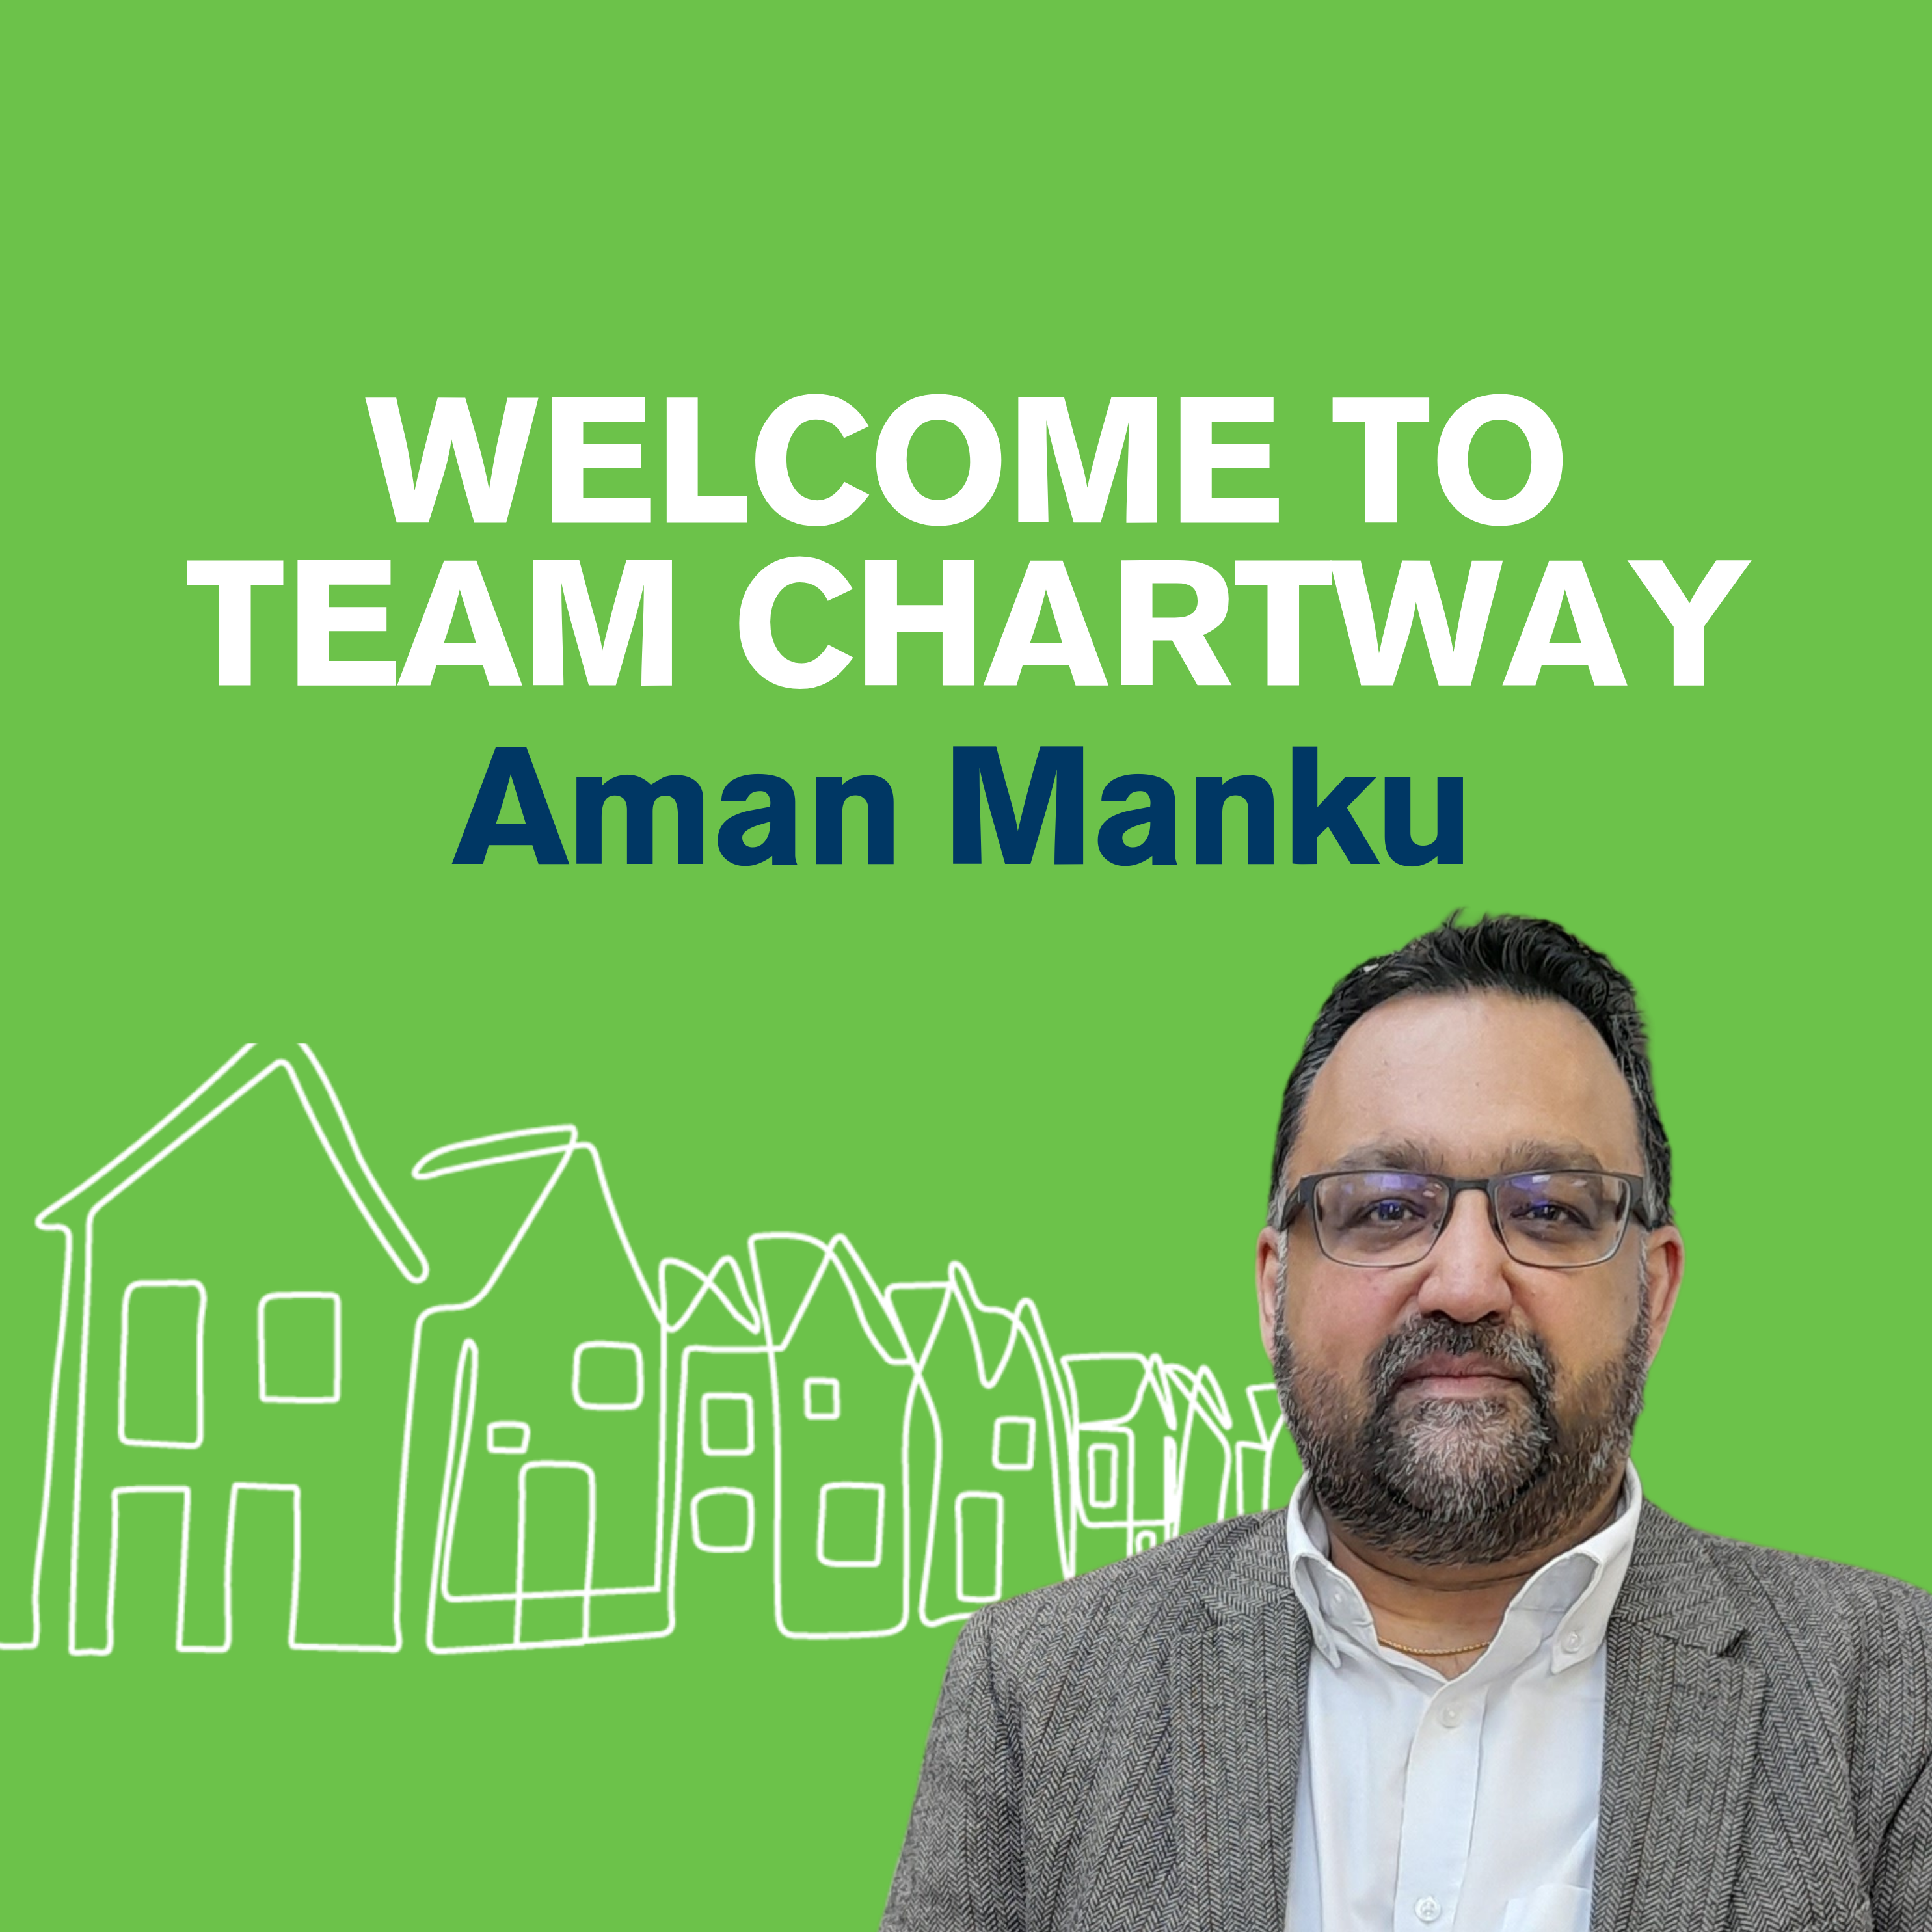 Aman Manku appointed as Technical Director at Chartway